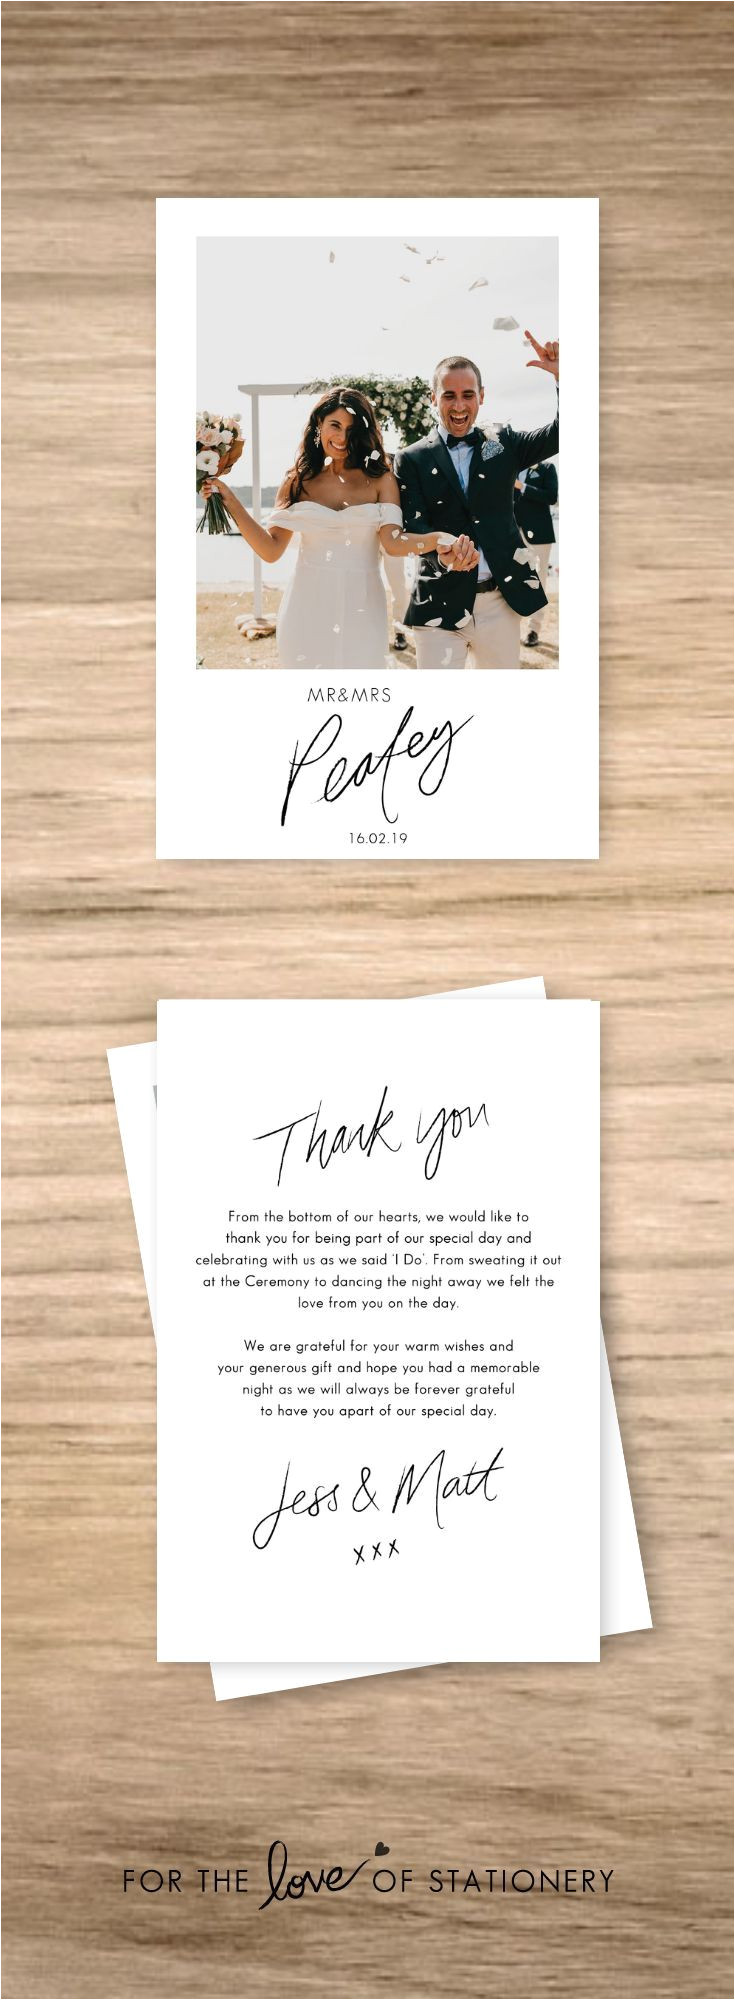 Wedding Thank You Card Messages Personalised Wedding Thank You Cards with Photos with